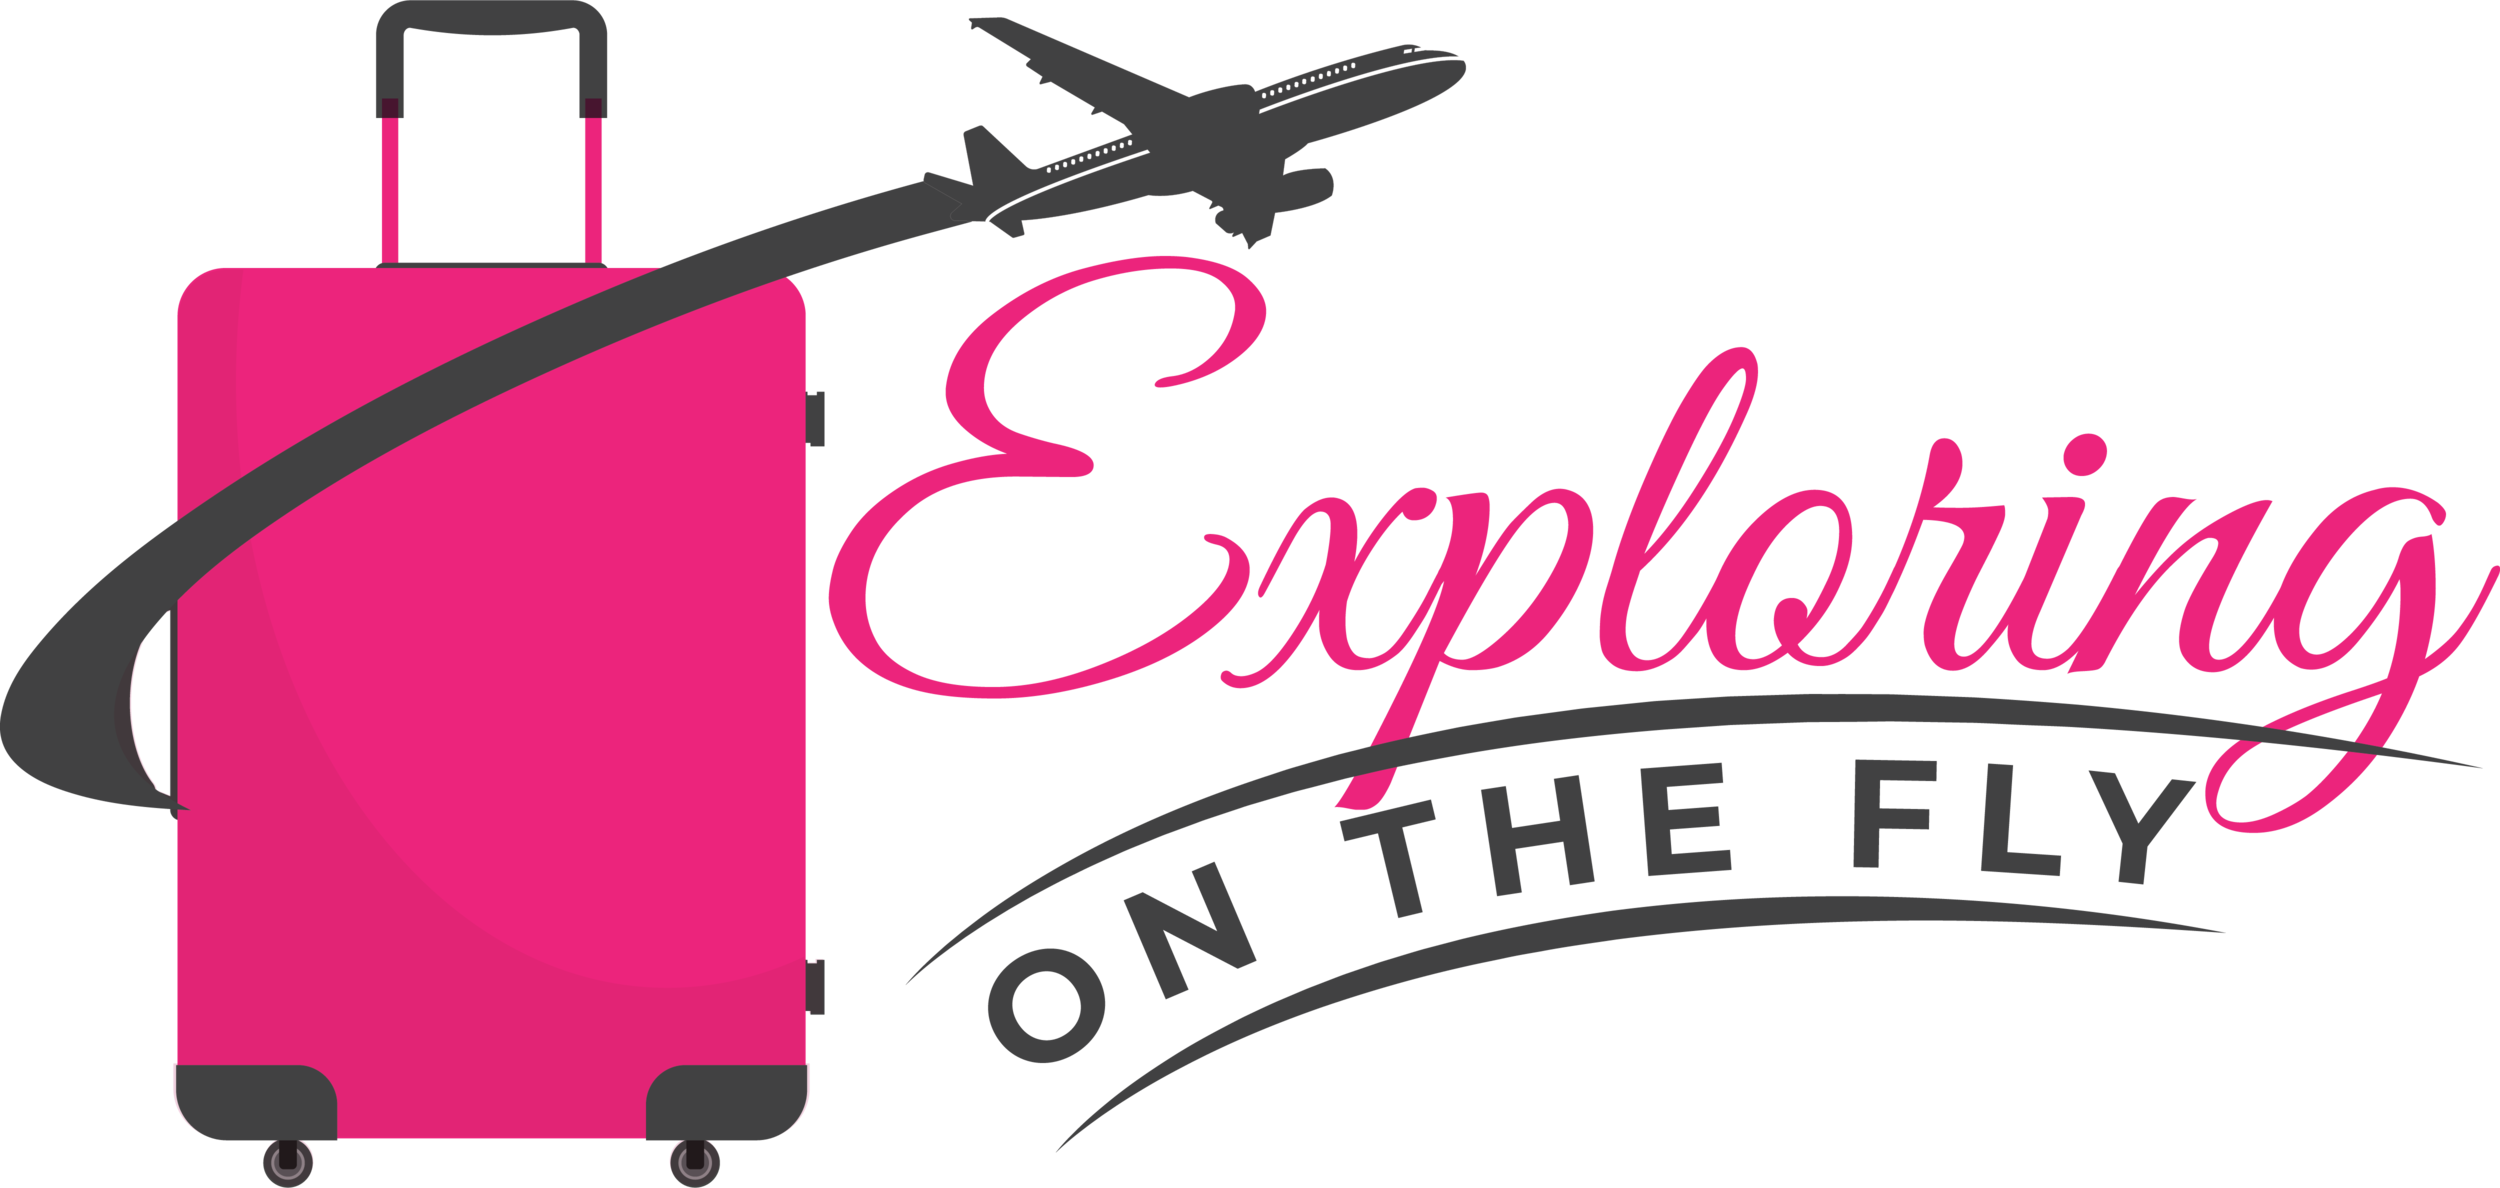 Exploring on the fly Logo.png